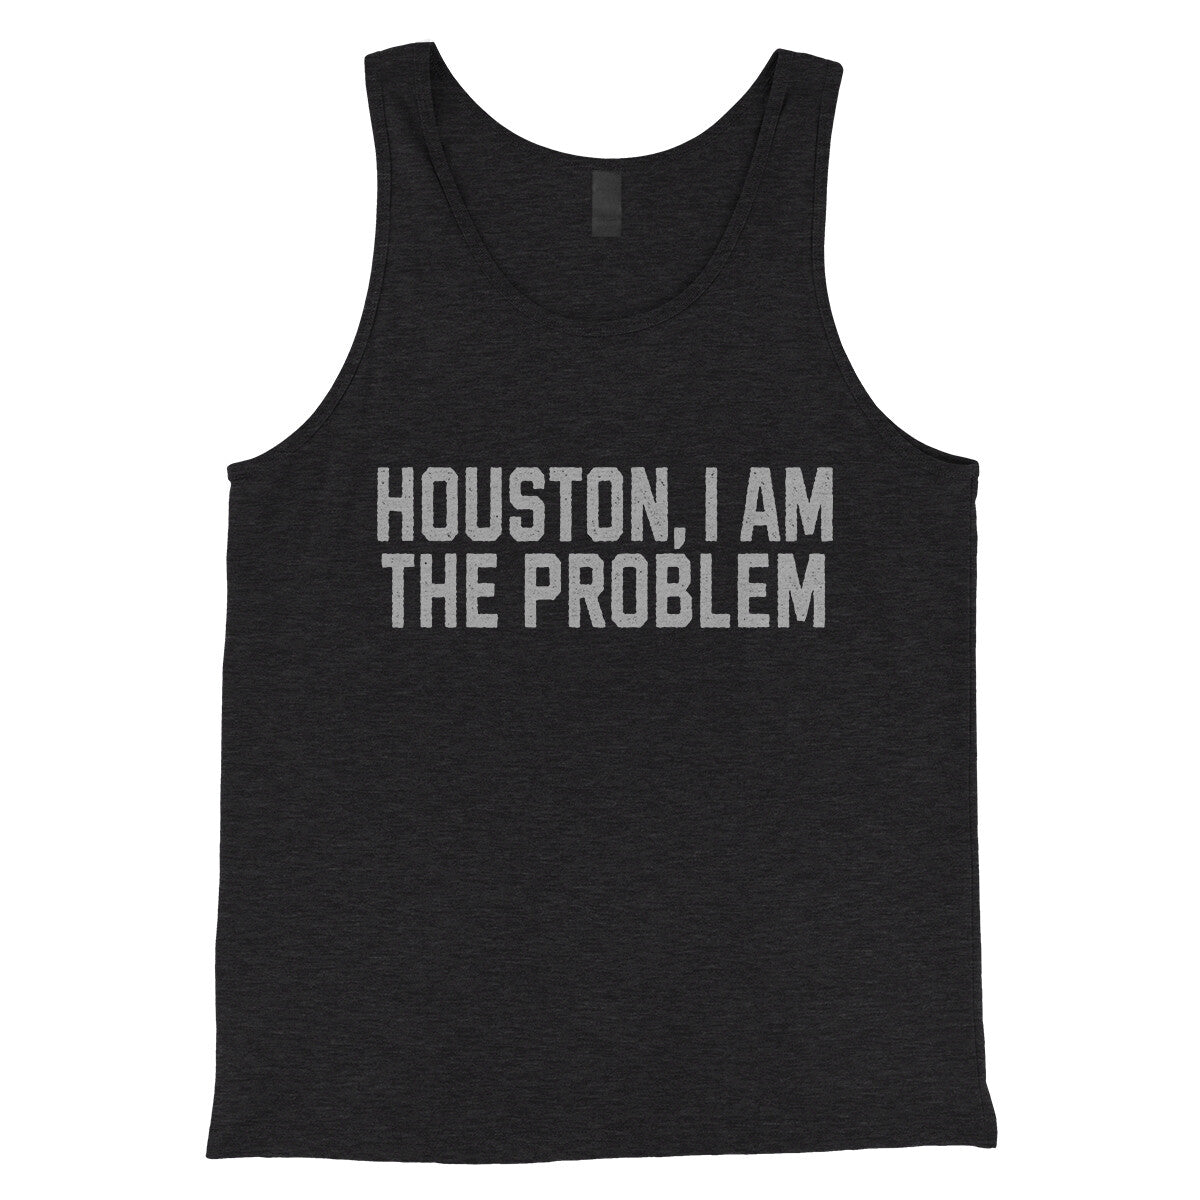 Houston I Am the Problem in Charcoal Black TriBlend Color